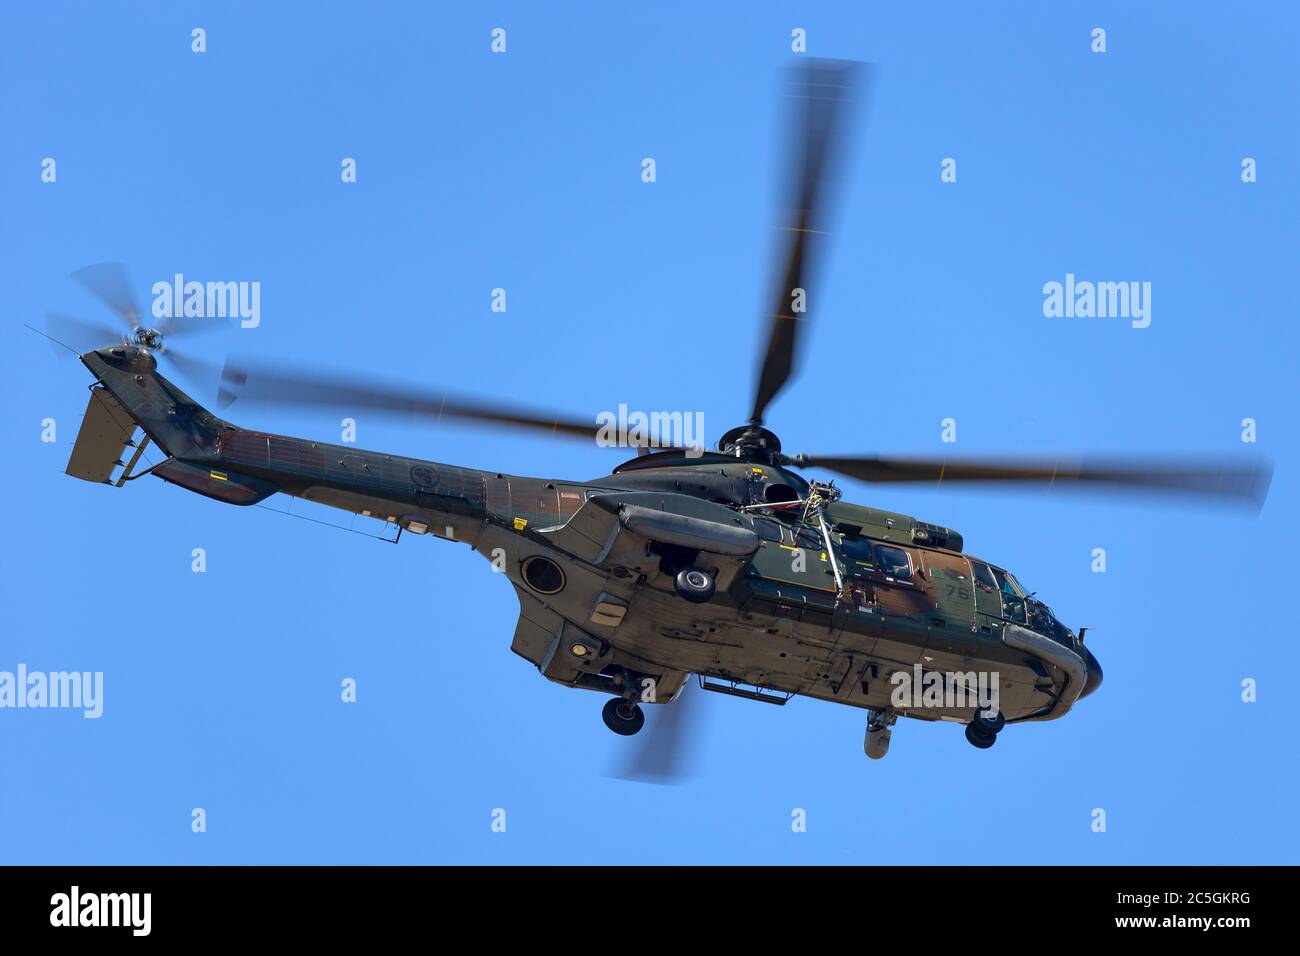 Republic of Singapore Air Force Aerospatiale AS-332 Super Puma military  helicopter Stock Photo - Alamy